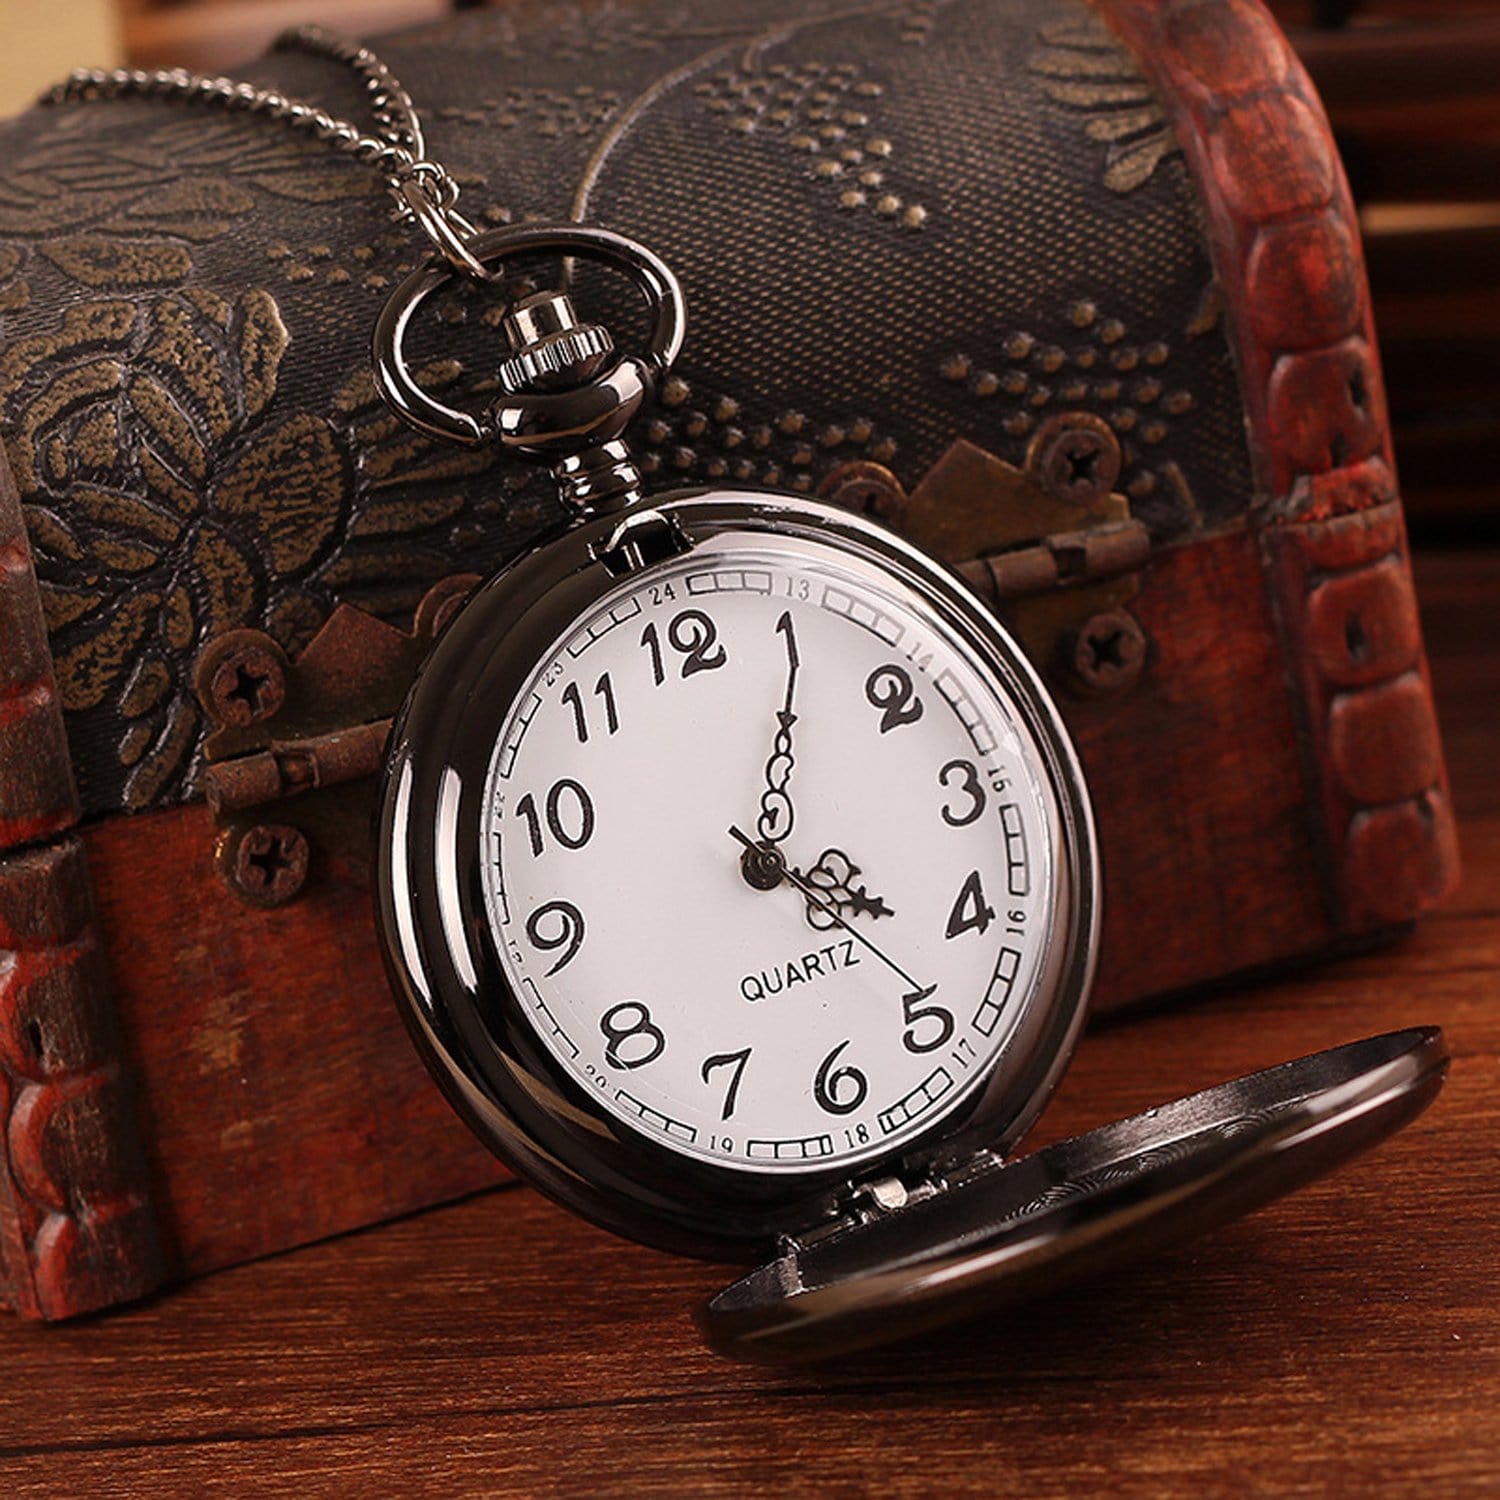 Pocket Watches To My Boyfriend - No Matter What Happens I Love You Pocket Watch GiveMe-Gifts